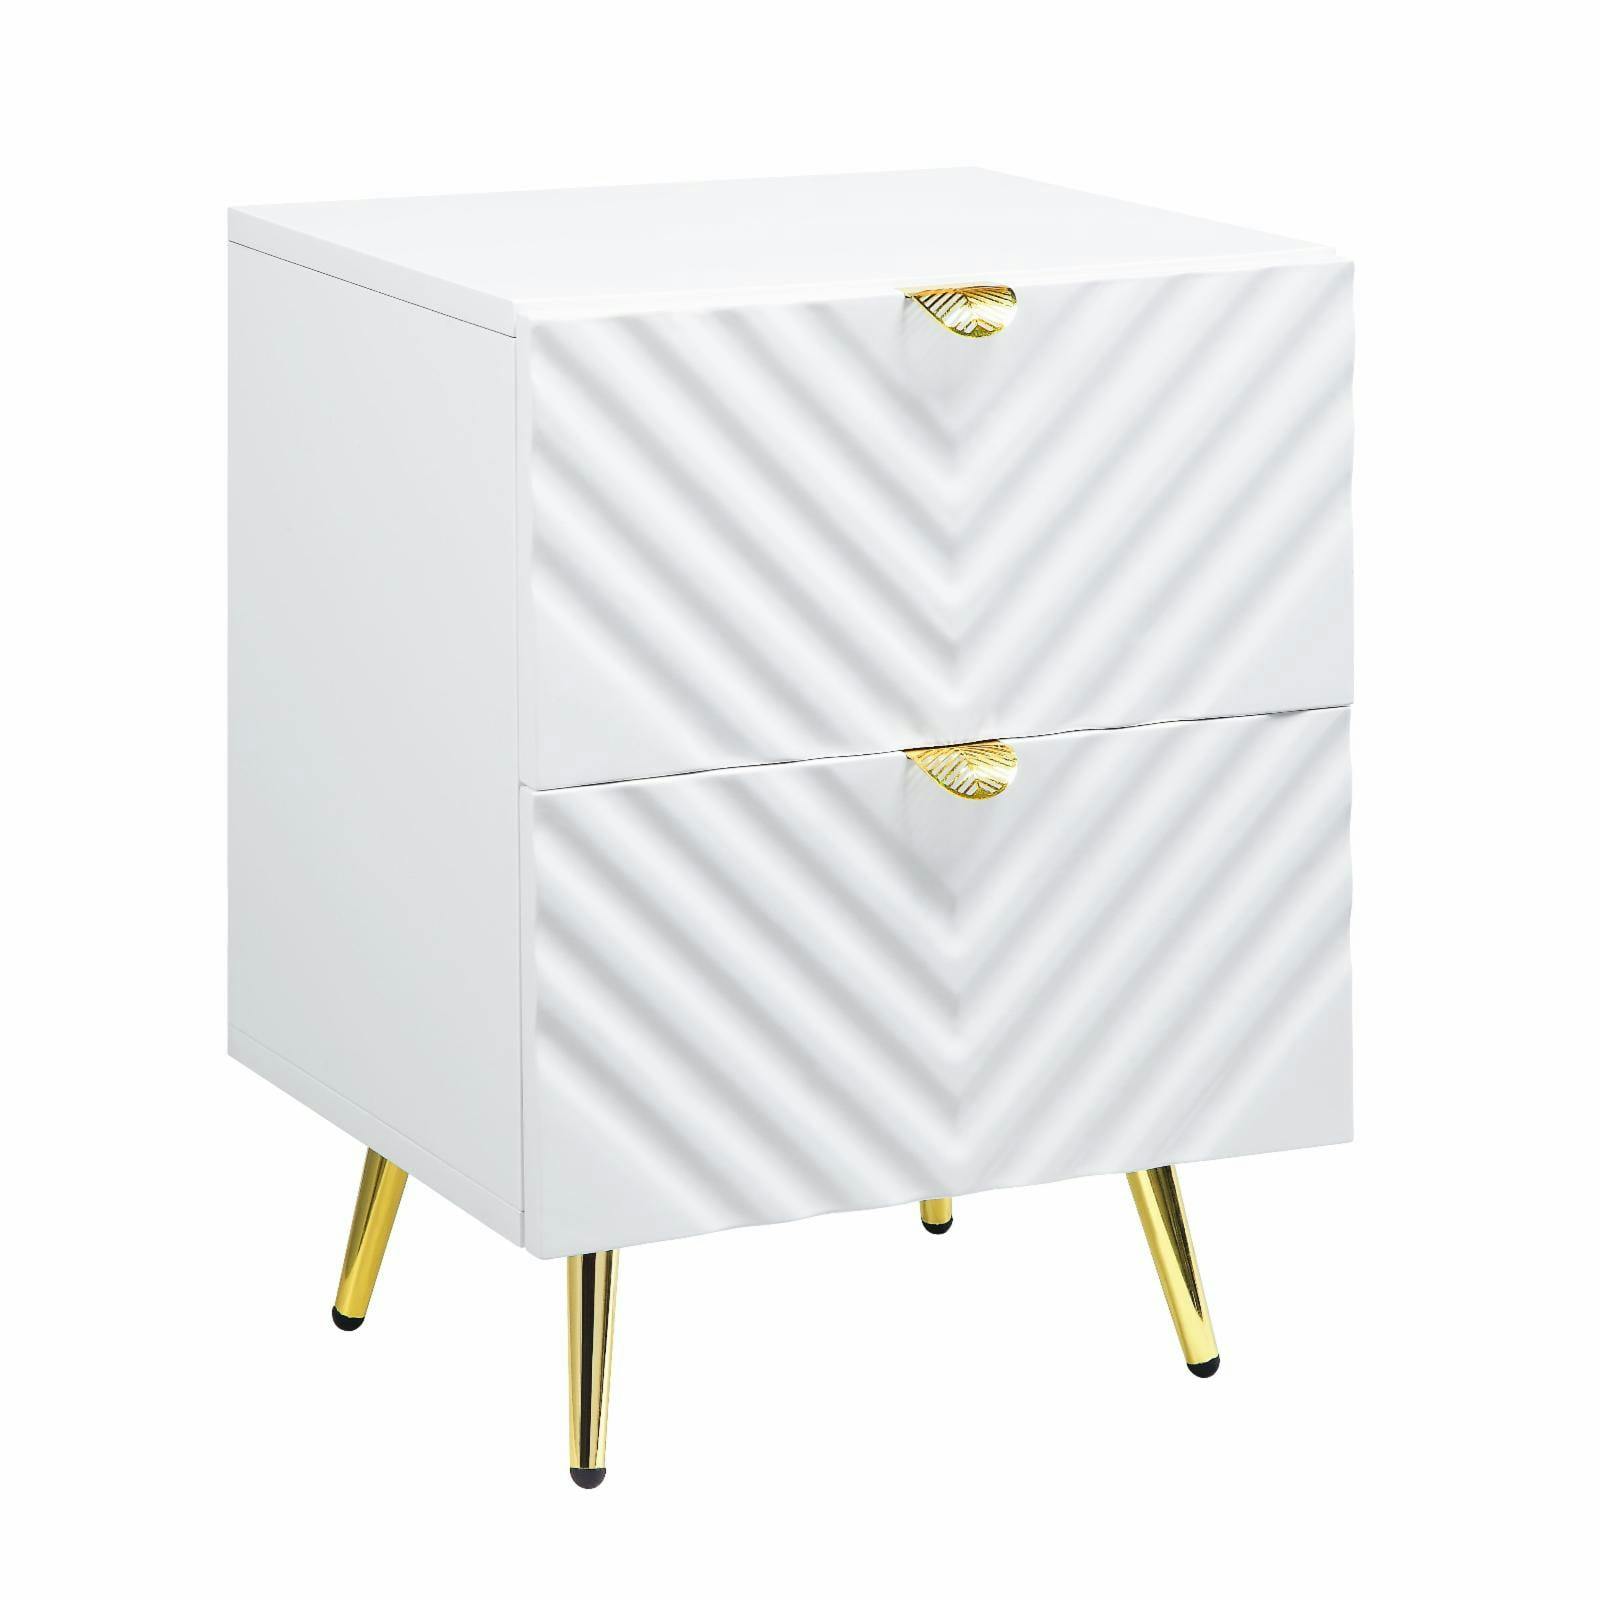 Gaines High Gloss White 2-Drawer Nightstand with Gold Accents